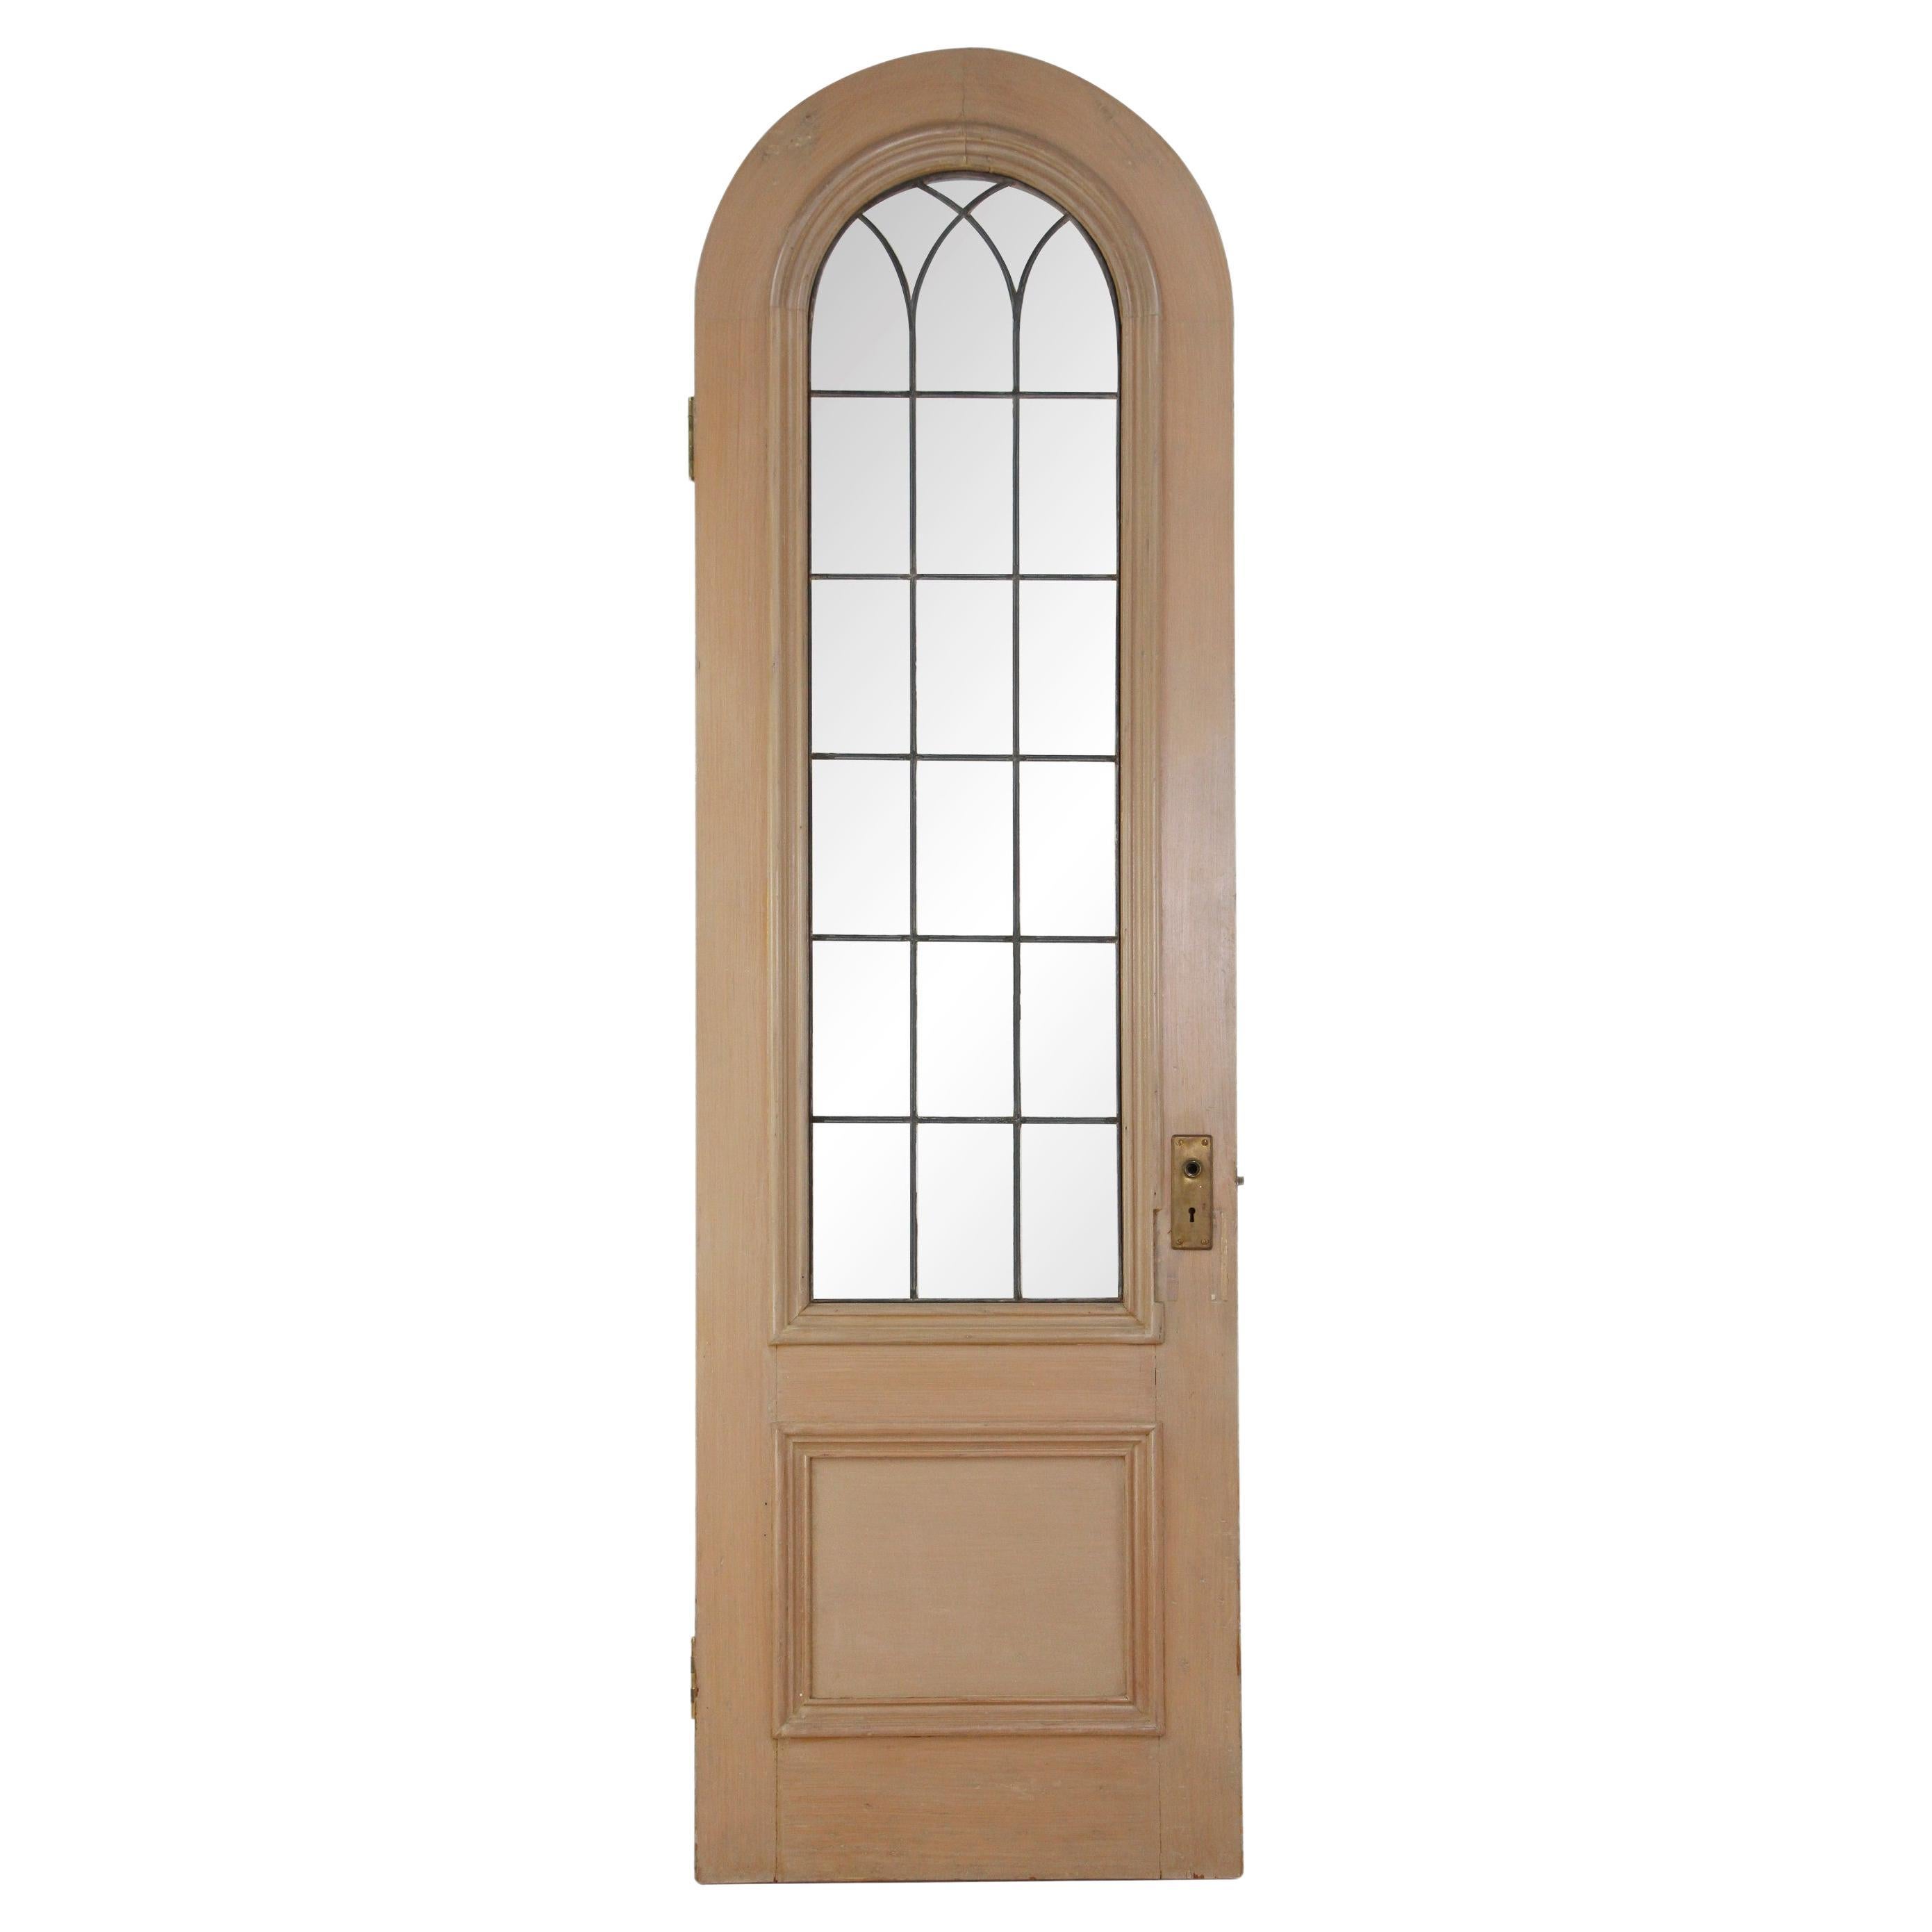 Arched American Wood Door Leaded Glass Window For Sale